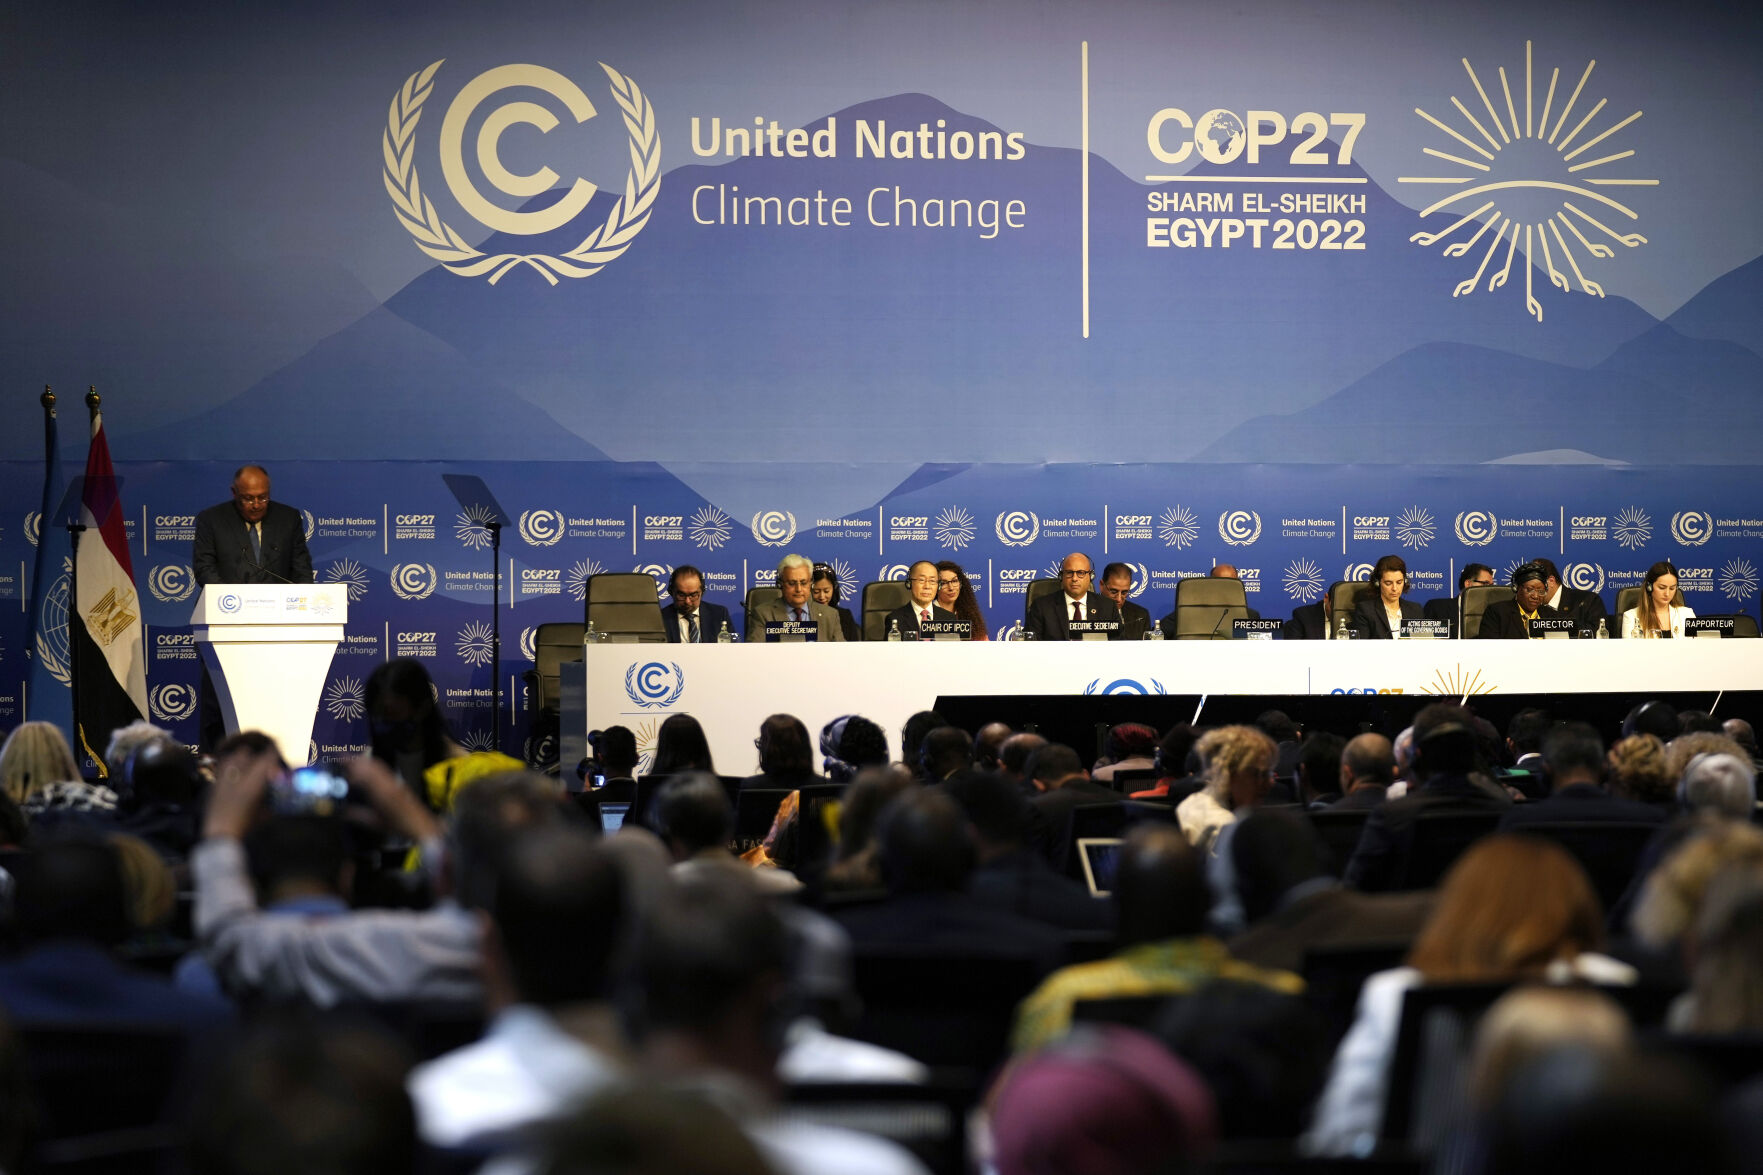 <p>FILE - Sameh Shoukry, president of the COP27 climate summit, left, speaks during an opening session at the COP27 U.N. Climate Summit, Sunday, Nov. 6, 2022, in Sharm el-Sheikh, Egypt. Nearly 50 heads of states or governments on Monday will take the stage in the first day of “high-level” international climate talks in Egypt with more to come in following days. (AP Photo/Peter Dejong, File)</p>   PHOTO CREDIT: Peter Dejong - staff, AP